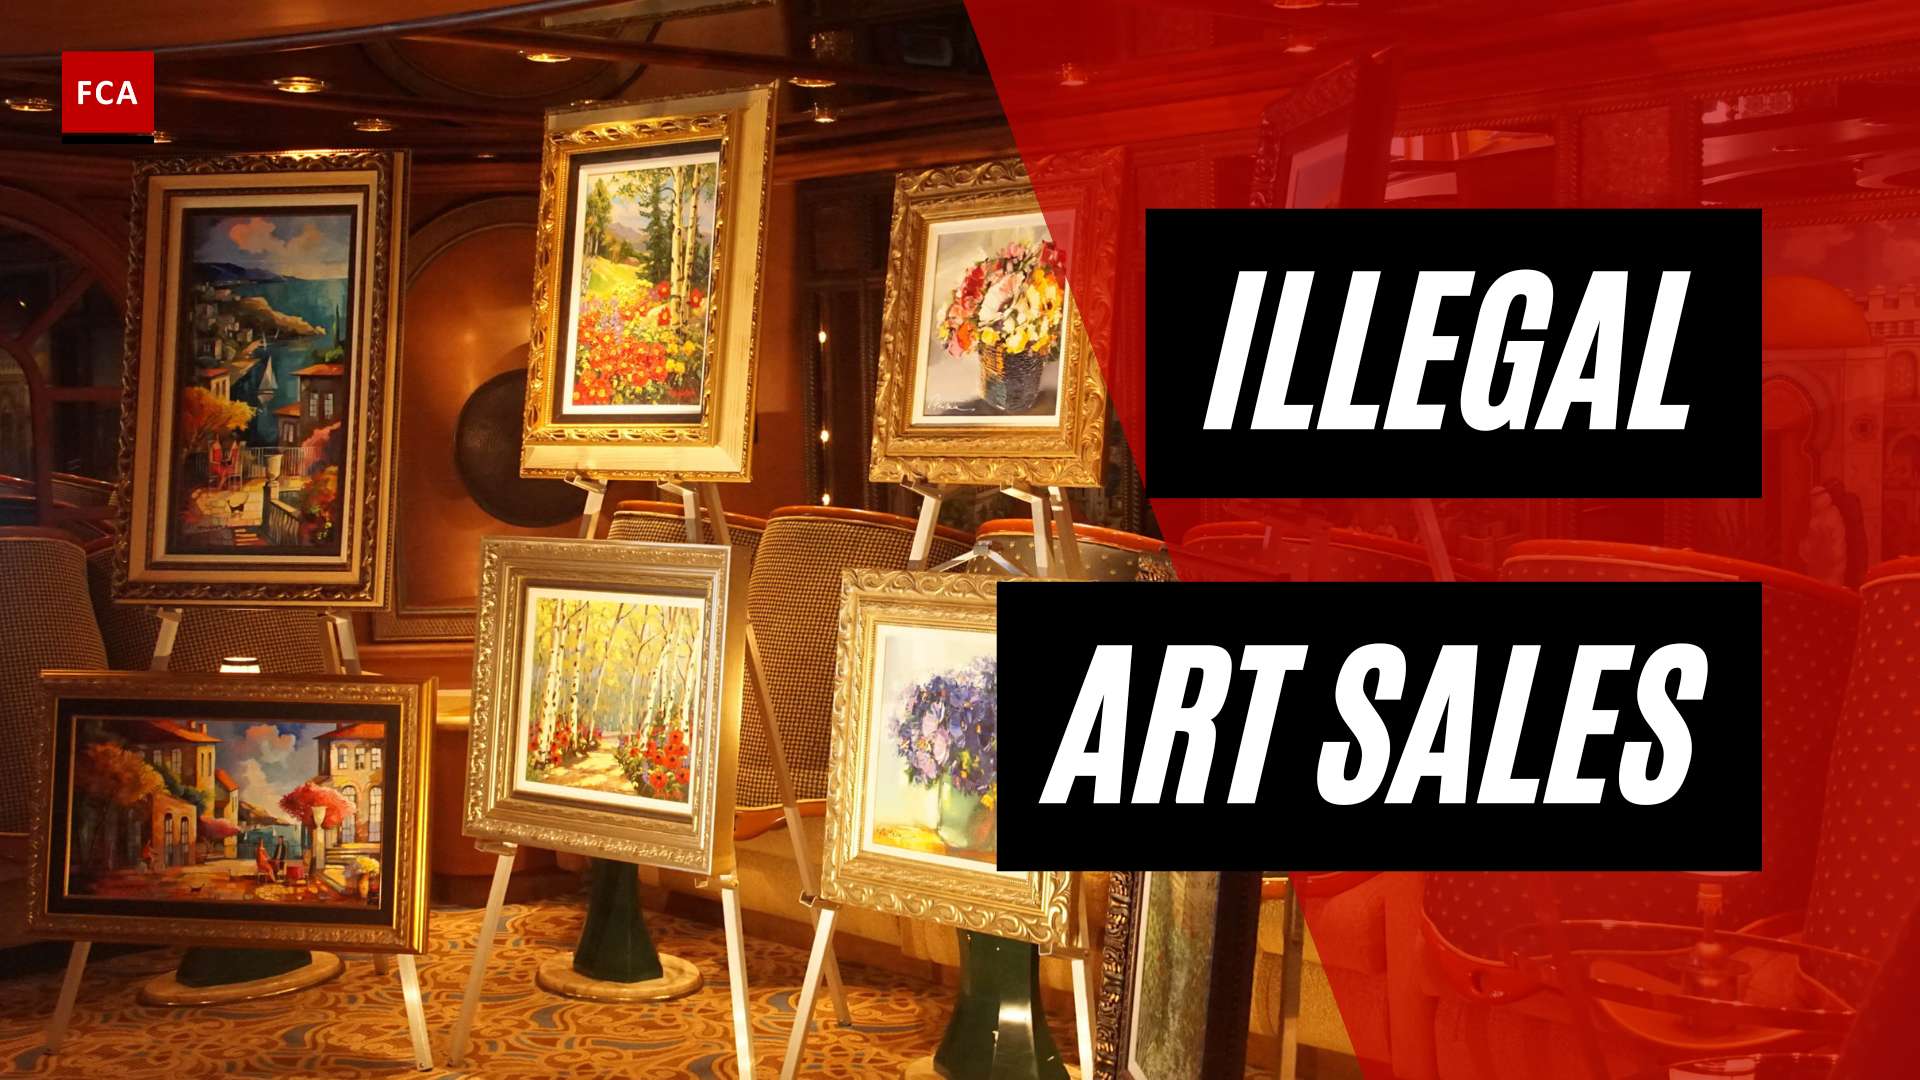 Follow The Trail: Tracking The Illegal Art Sales Network